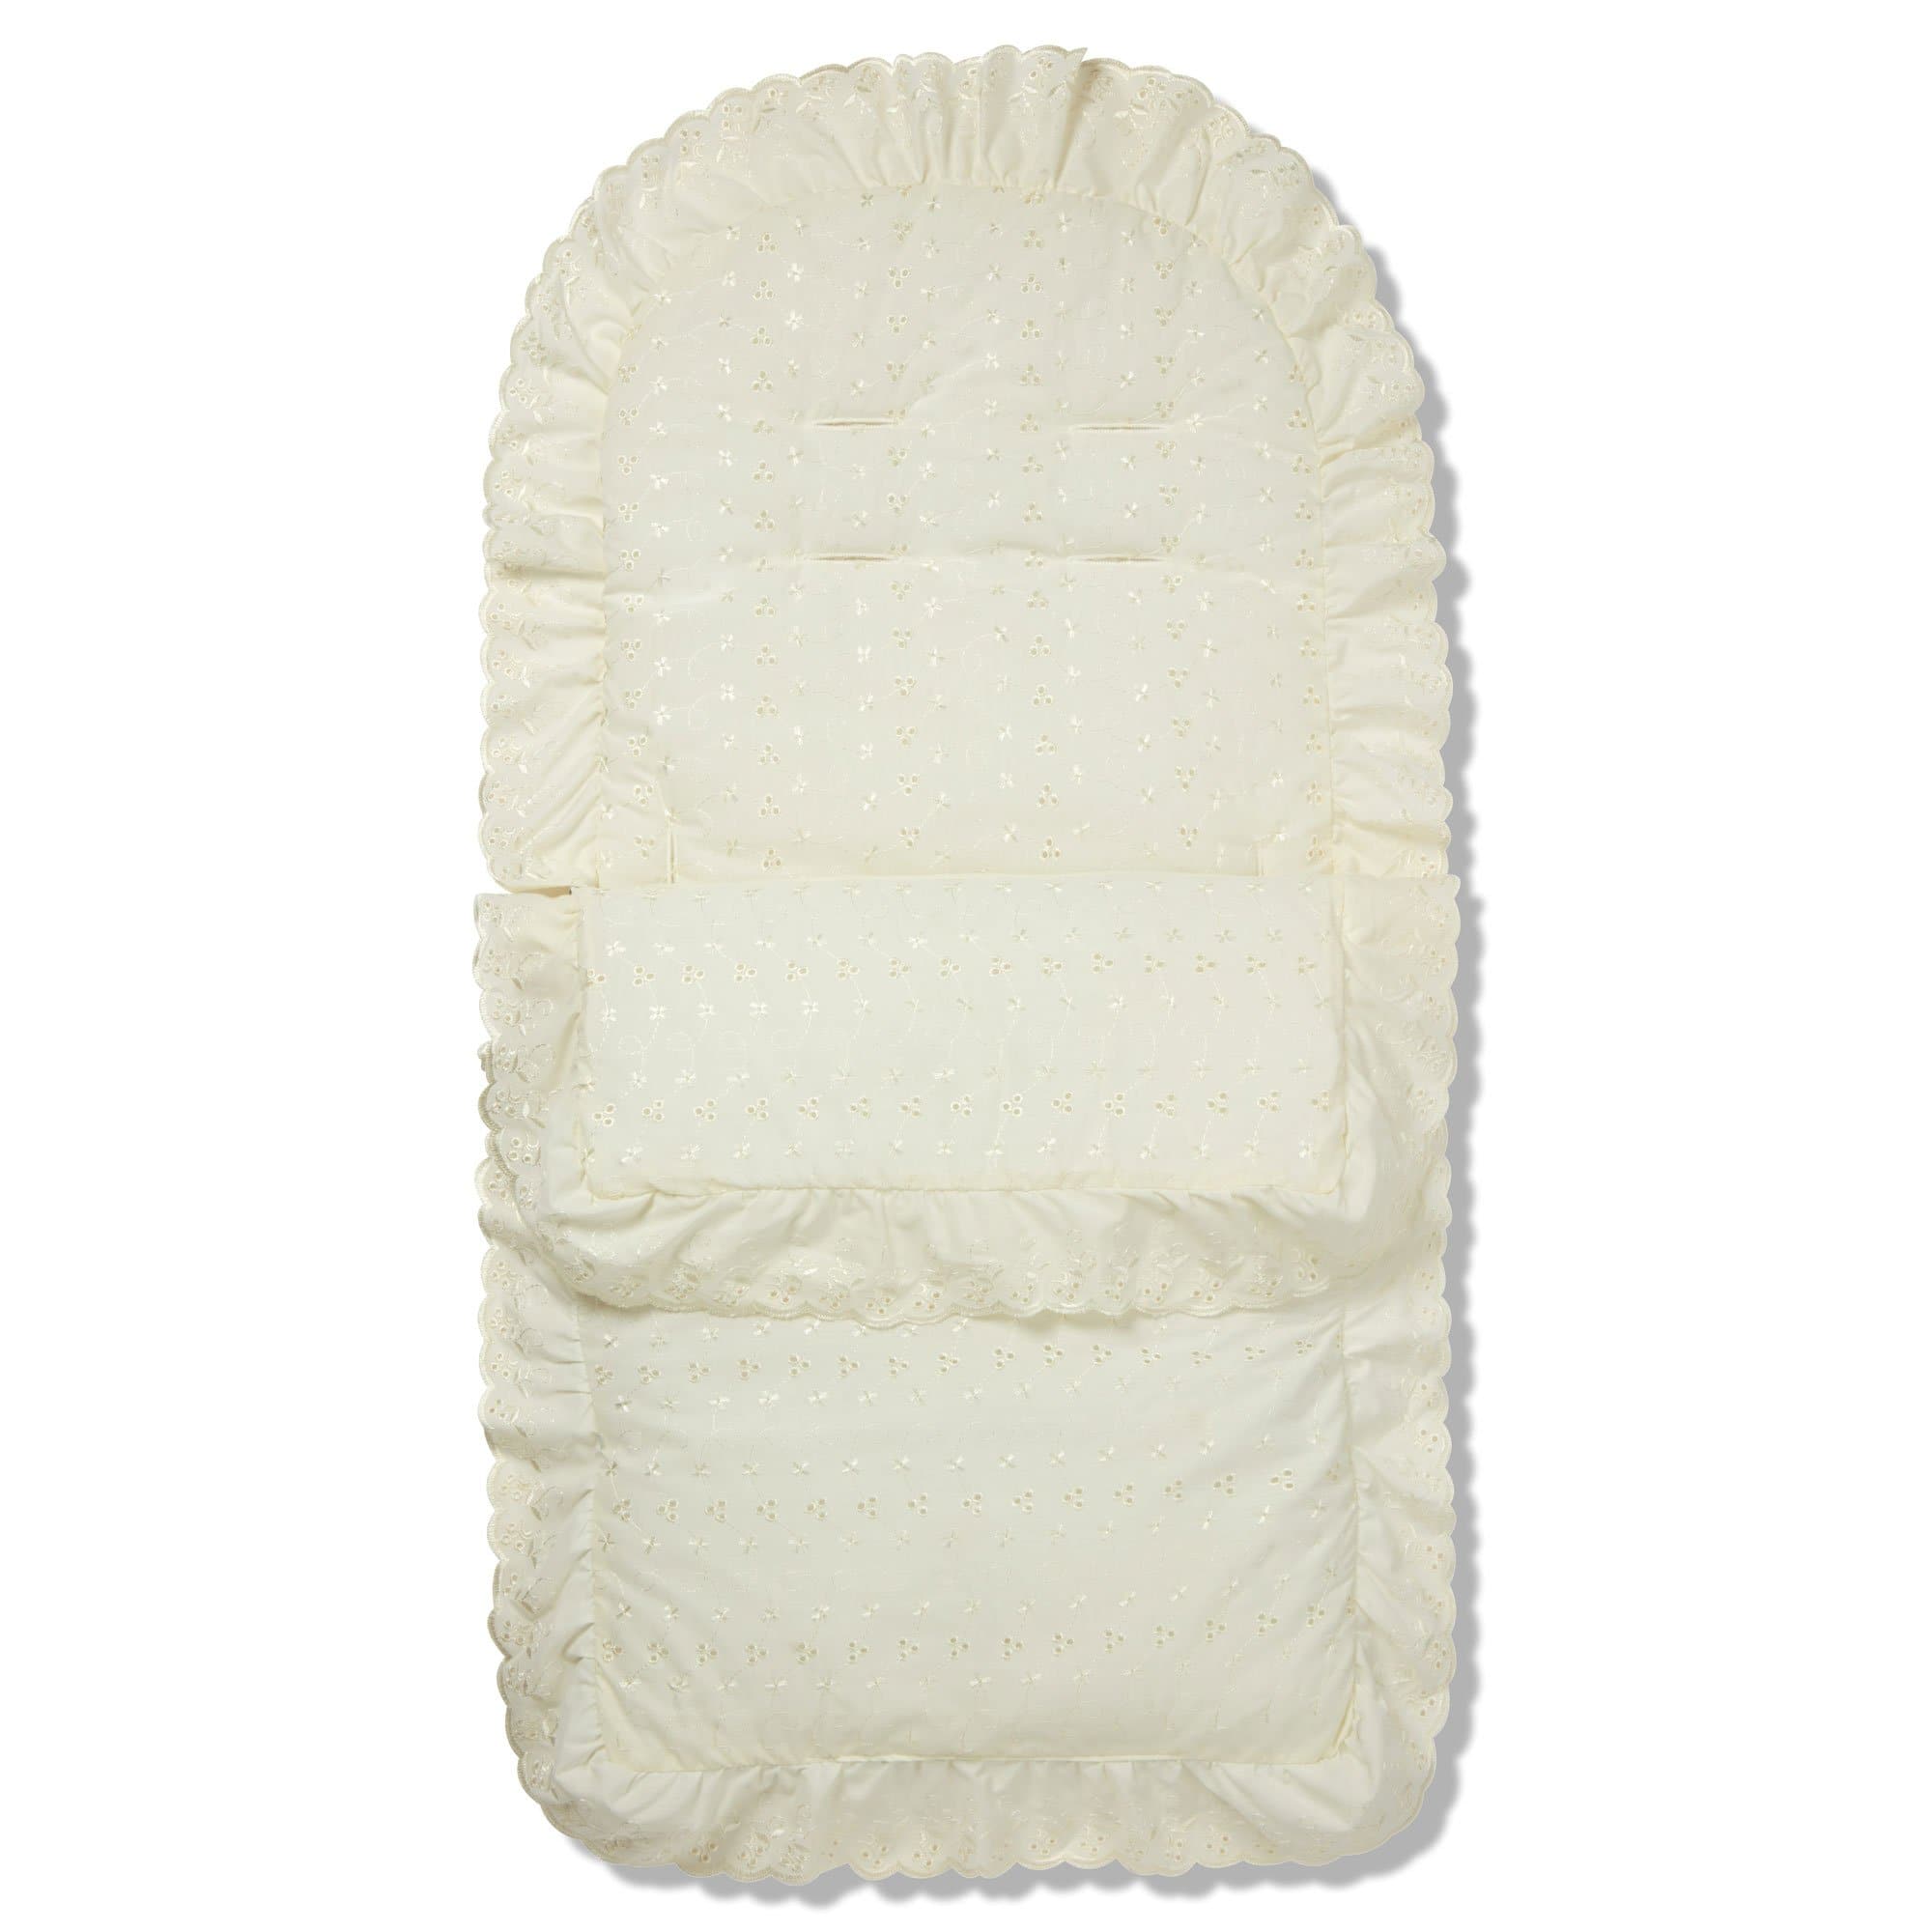 Universal Broderie Anglaise Pushchair Footmuff / Cosy Toes - Fits All Pushchairs / Prams And Buggies - For Your Little One